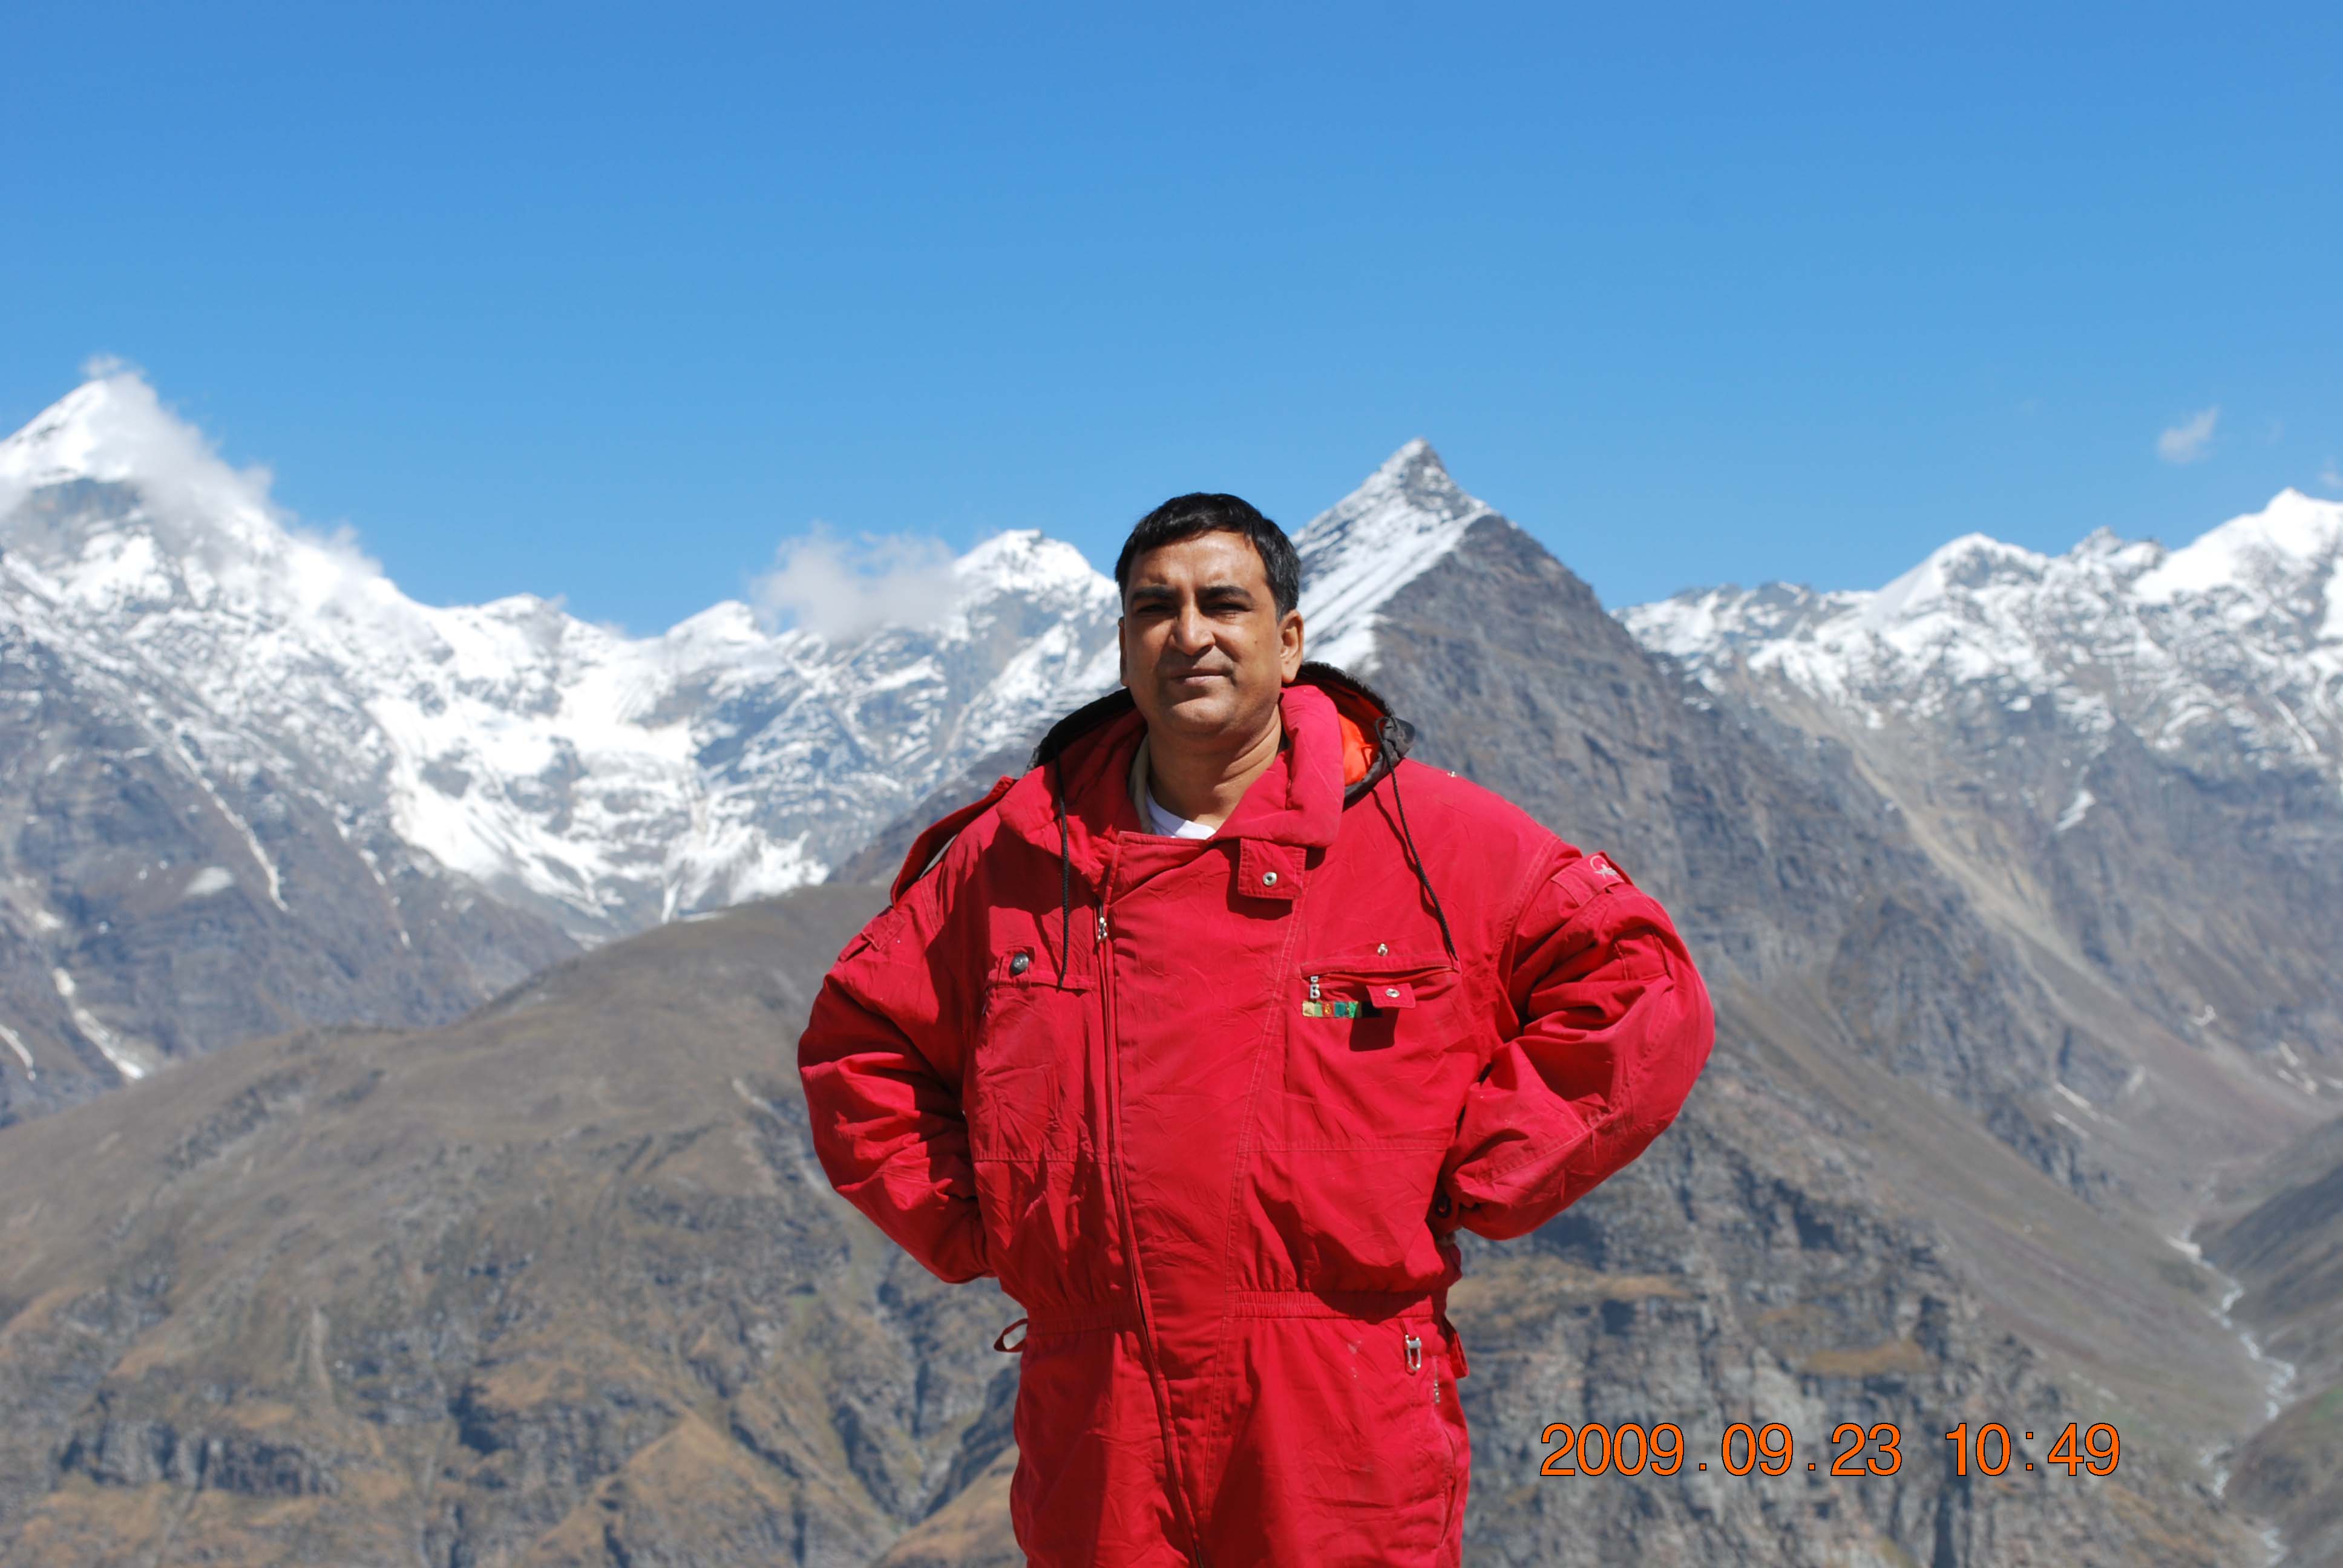 Author at Rohtang Pass